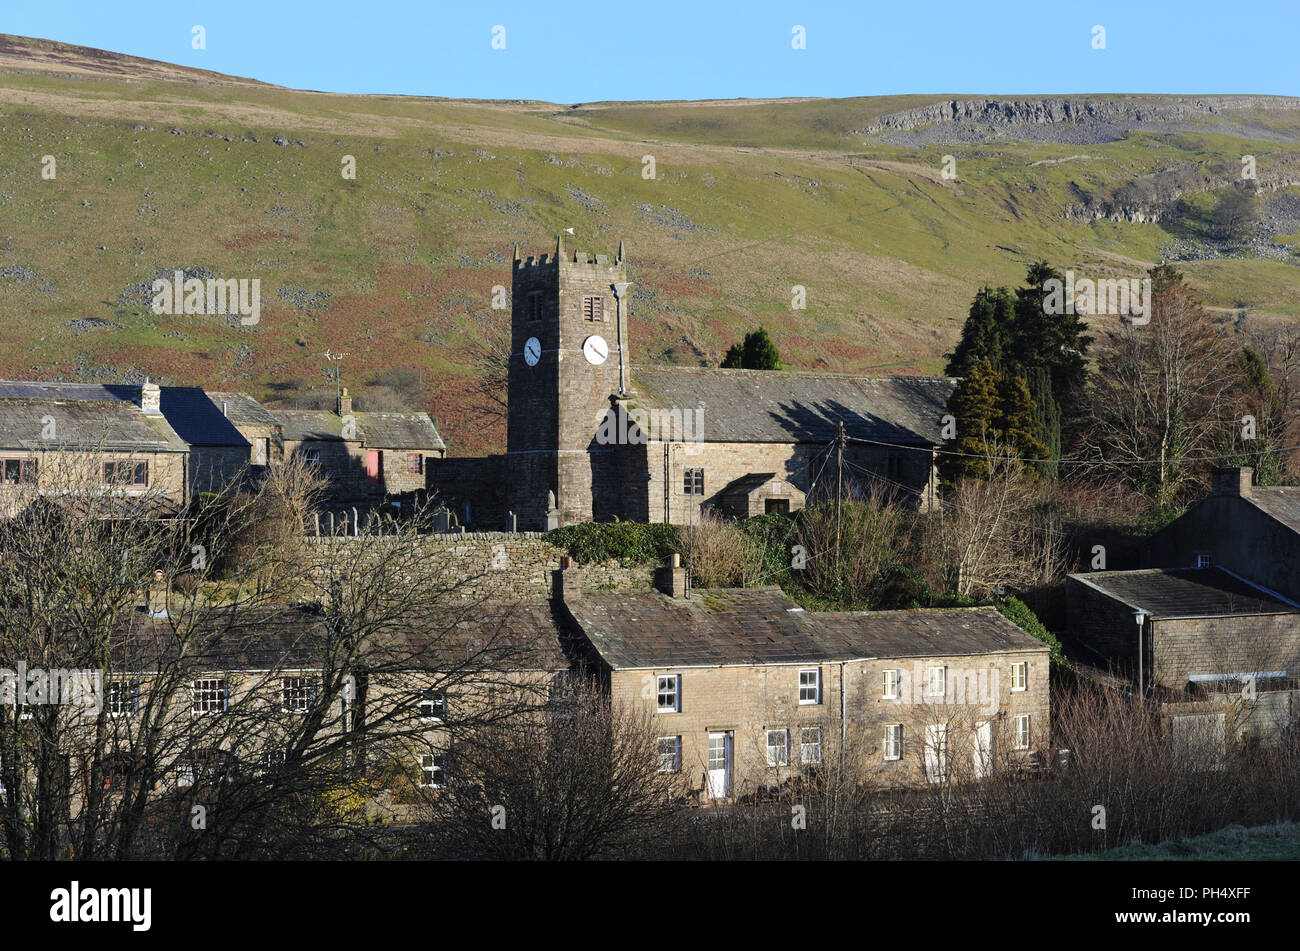 St Mary's Church in the village of Muker, Swaledale, Yorkshire Dales, Britain. The church tower clock reads 10.20 Stock Photo